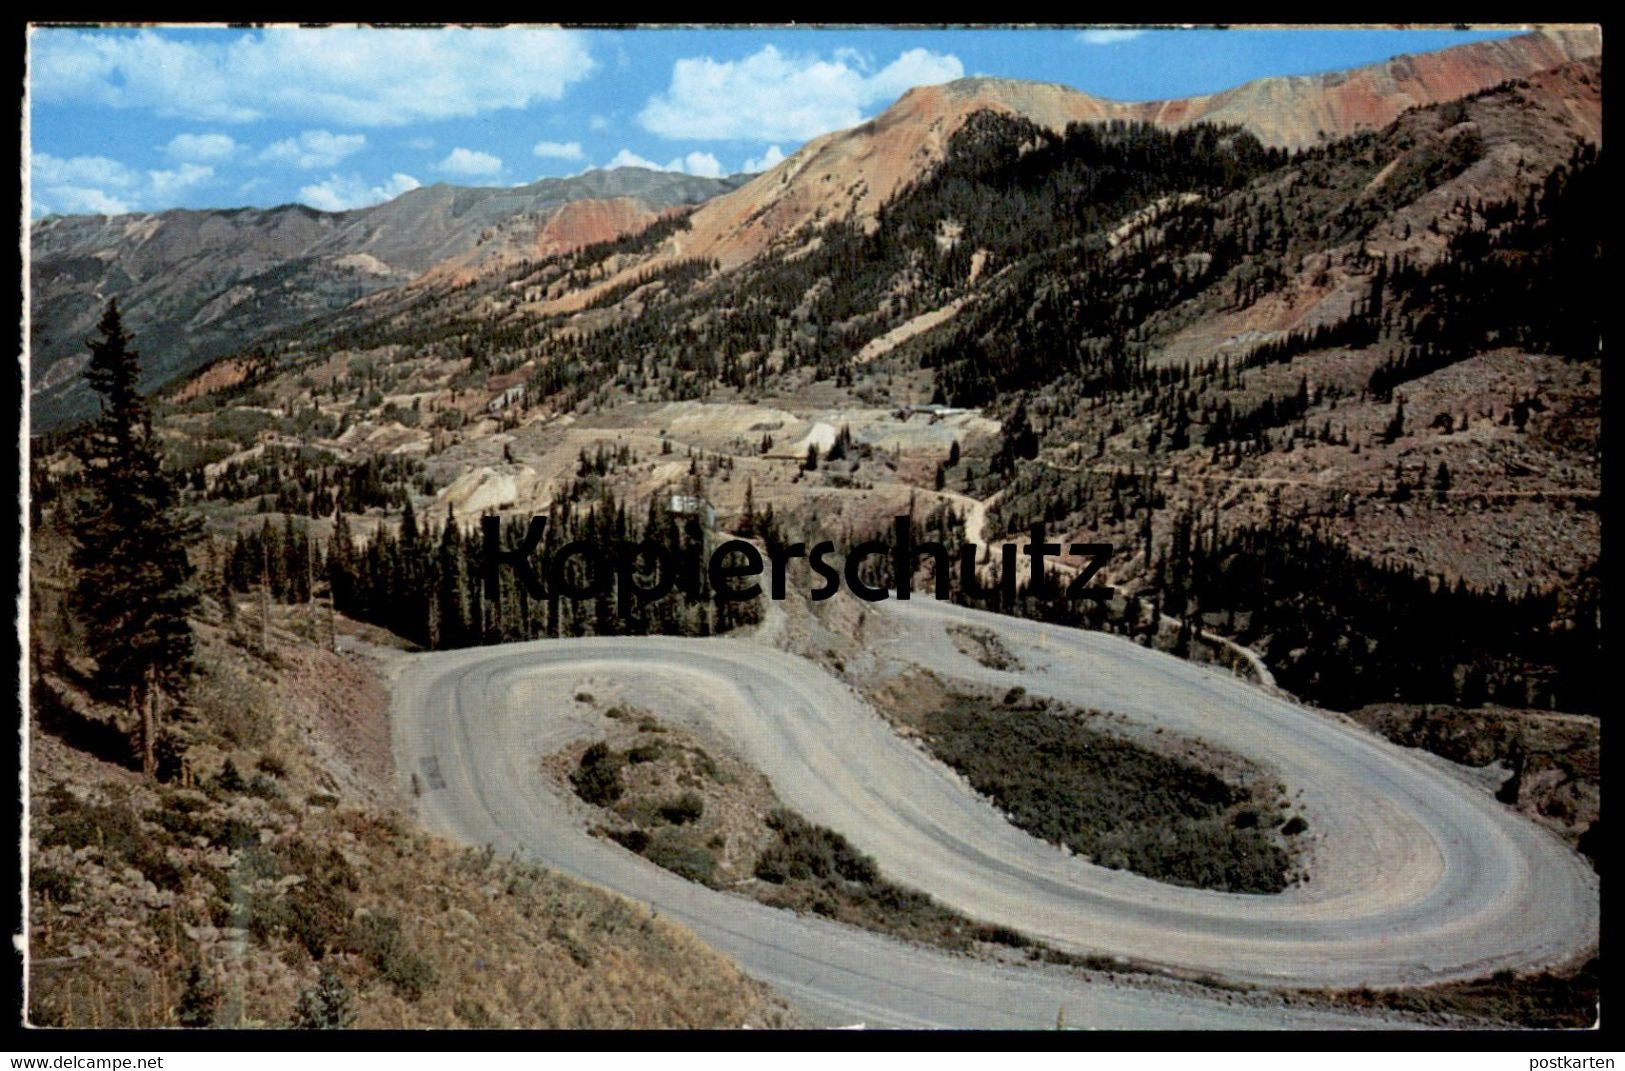 ÄLTERE POSTKARTE HAIRPIN TURNS ON THE MILLION DOLLAR HIGHWAY IN ITS CLIMB UP RED MOUNTAIN PASS Motorway Cpa AK - Rocky Mountains